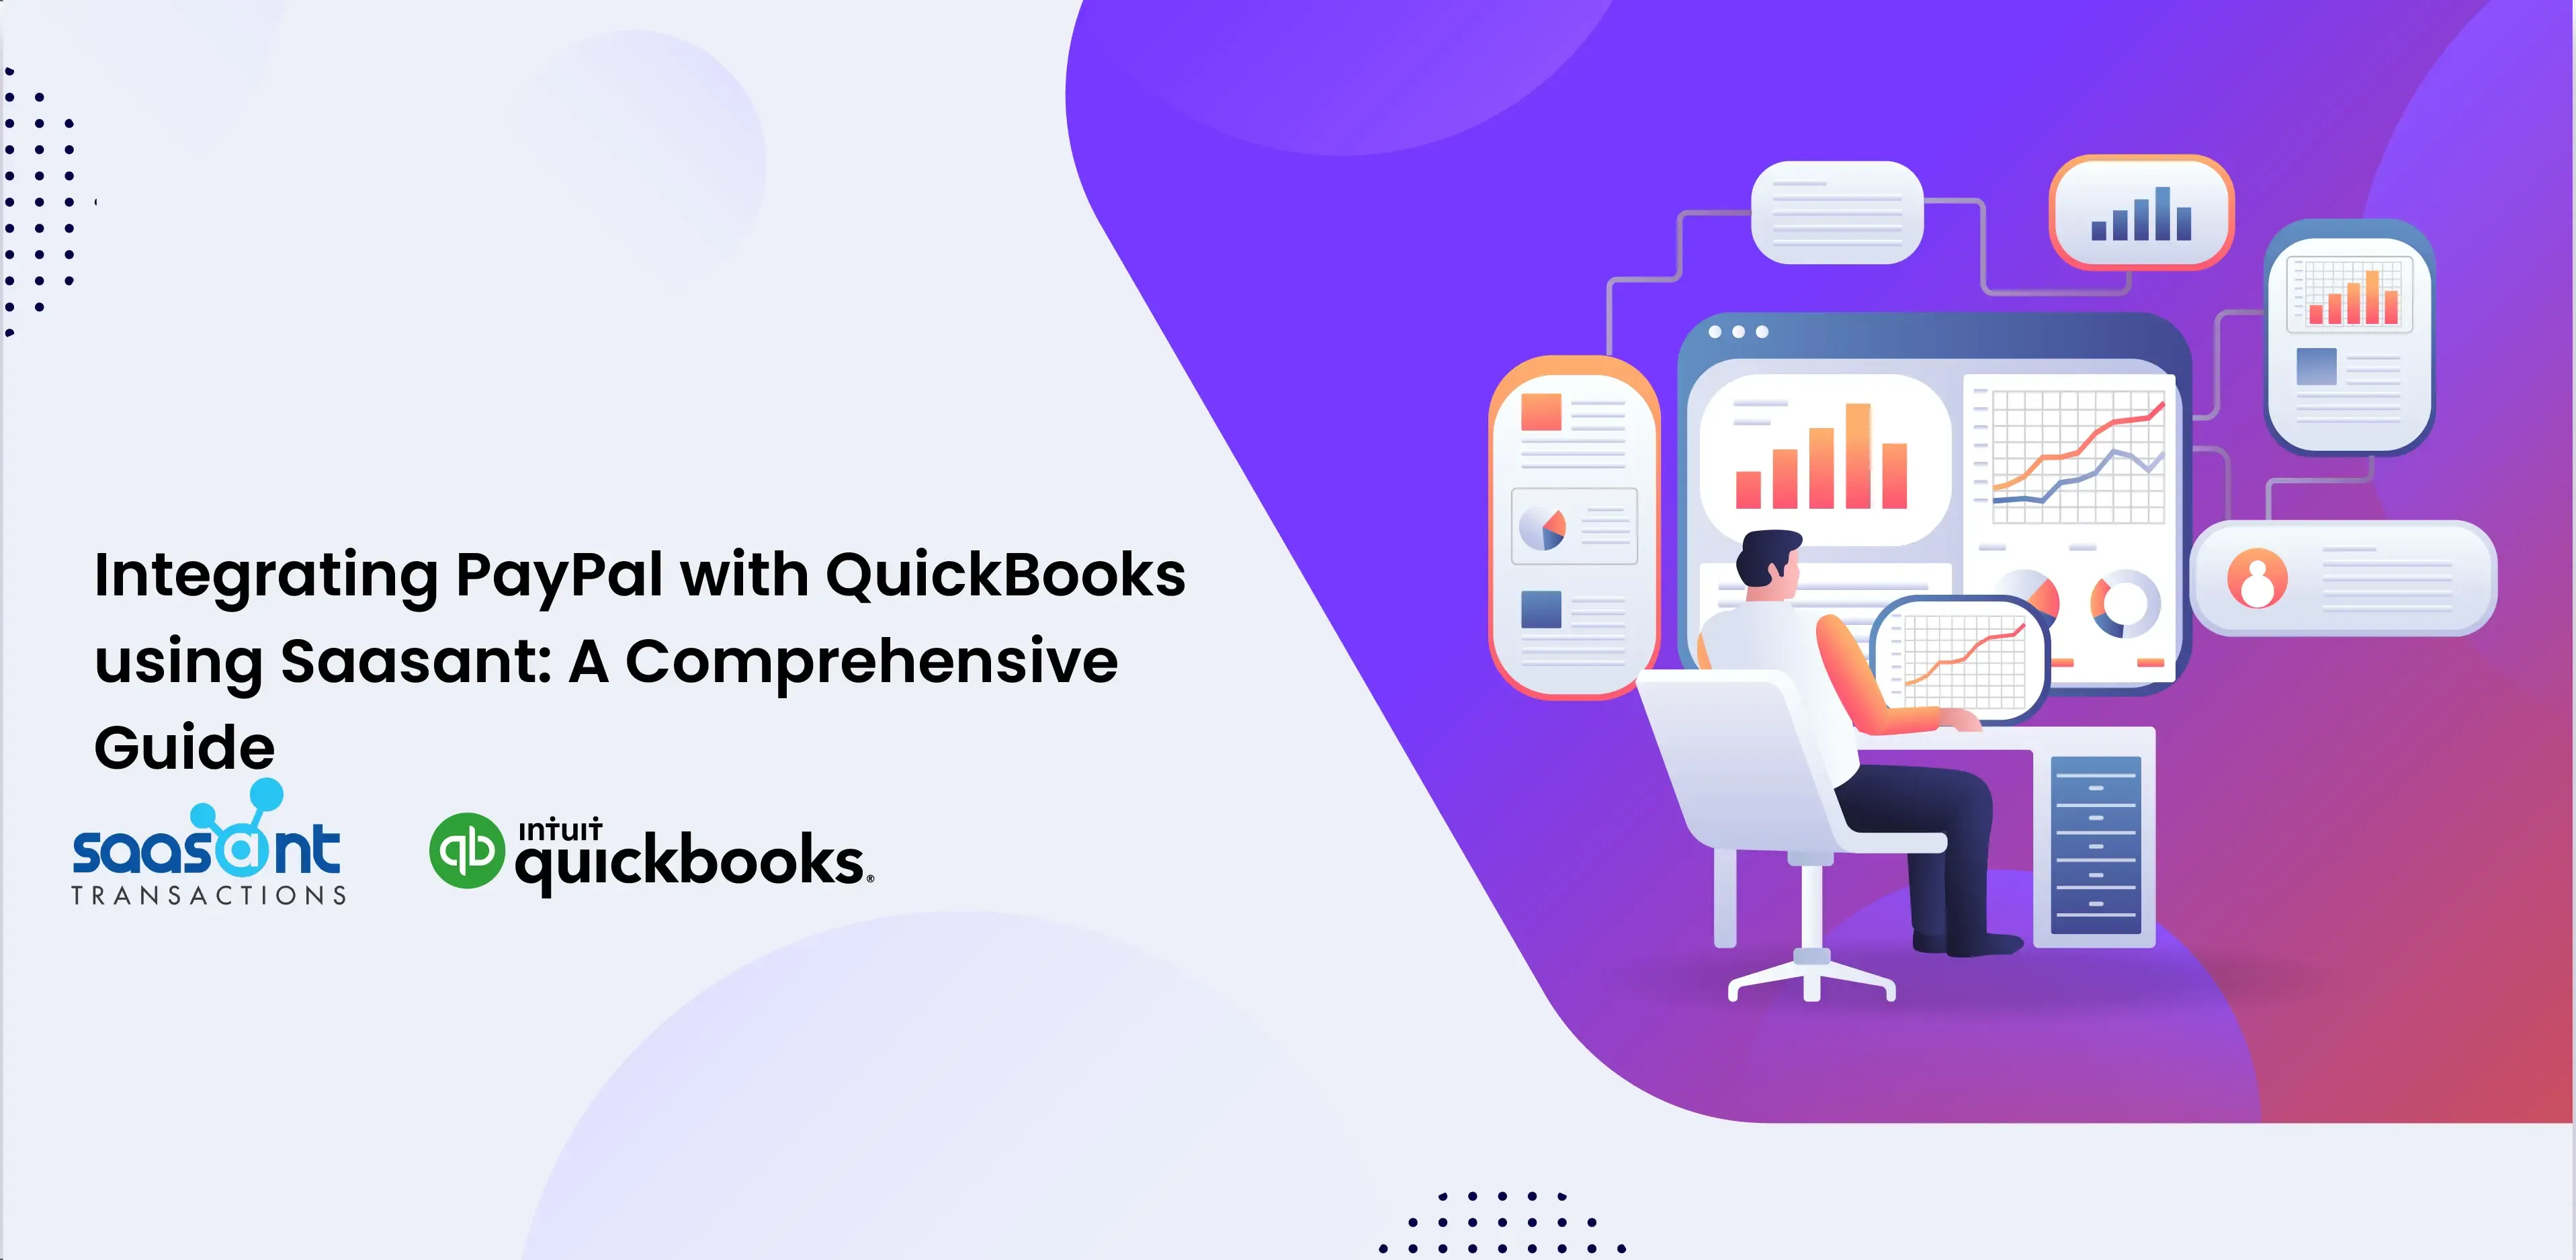 Integrating-PayPal-with-QuickBooks-using-Saasant-A-Comprehensive-Guide.webp